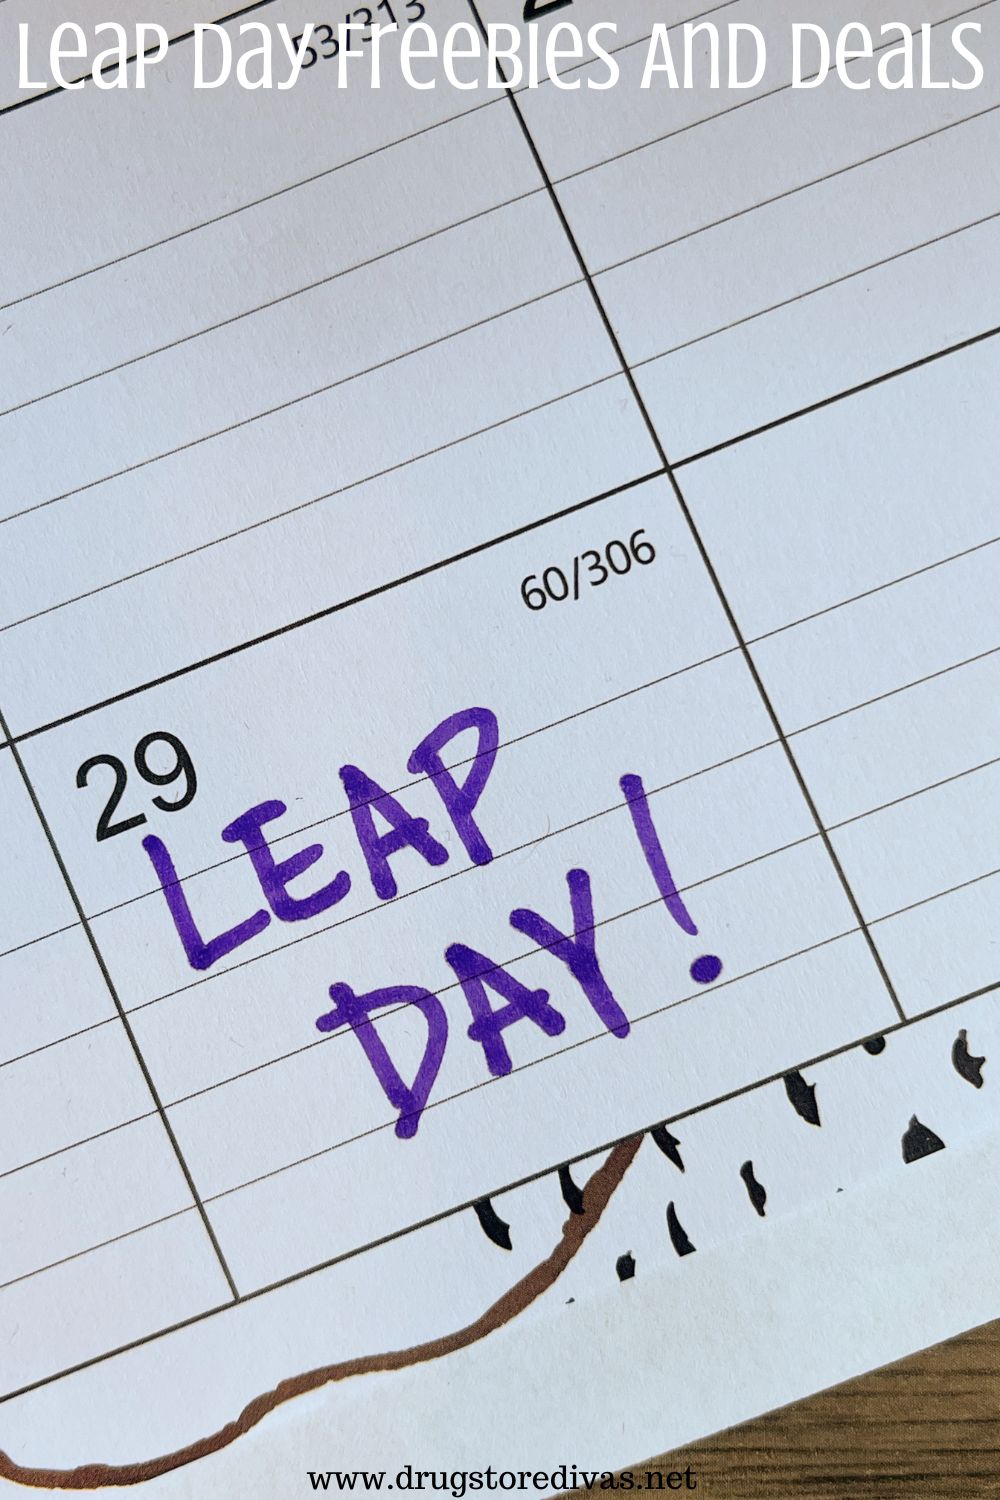 The calendar opened to the 29th, which says Leap Day! on it, and the words 